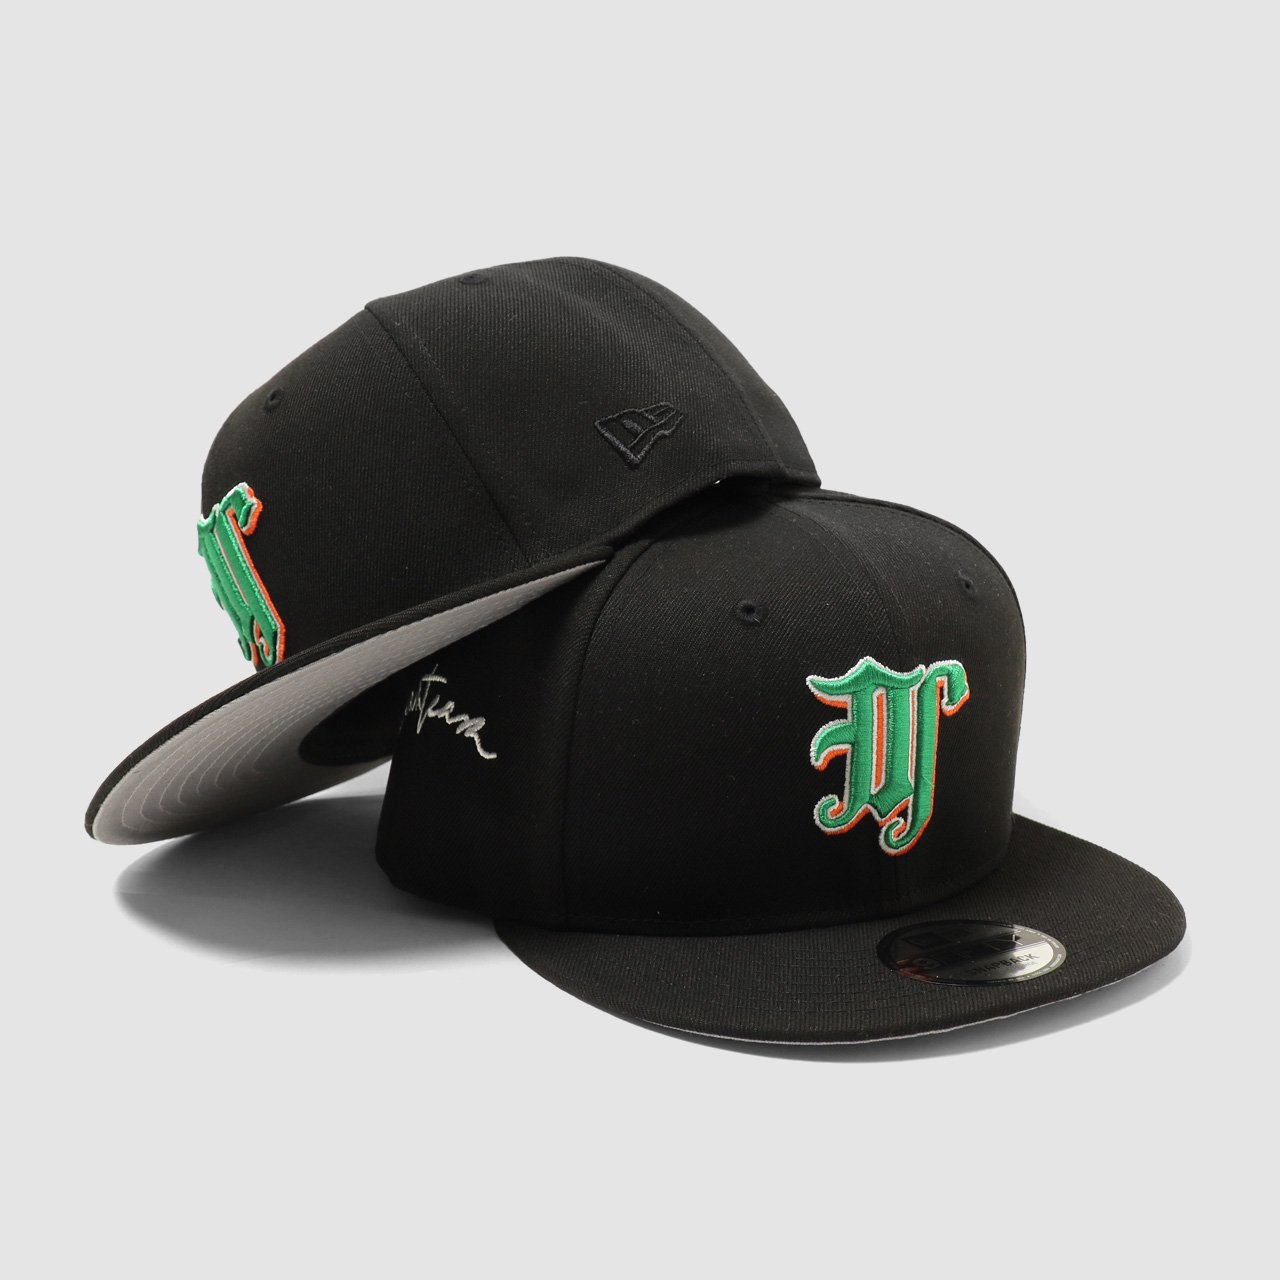 <img class='new_mark_img1' src='https://img.shop-pro.jp/img/new/icons21.gif' style='border:none;display:inline;margin:0px;padding:0px;width:auto;' />DT Old Logo New Era 9Fifty Snapback Cap [Script Logo]